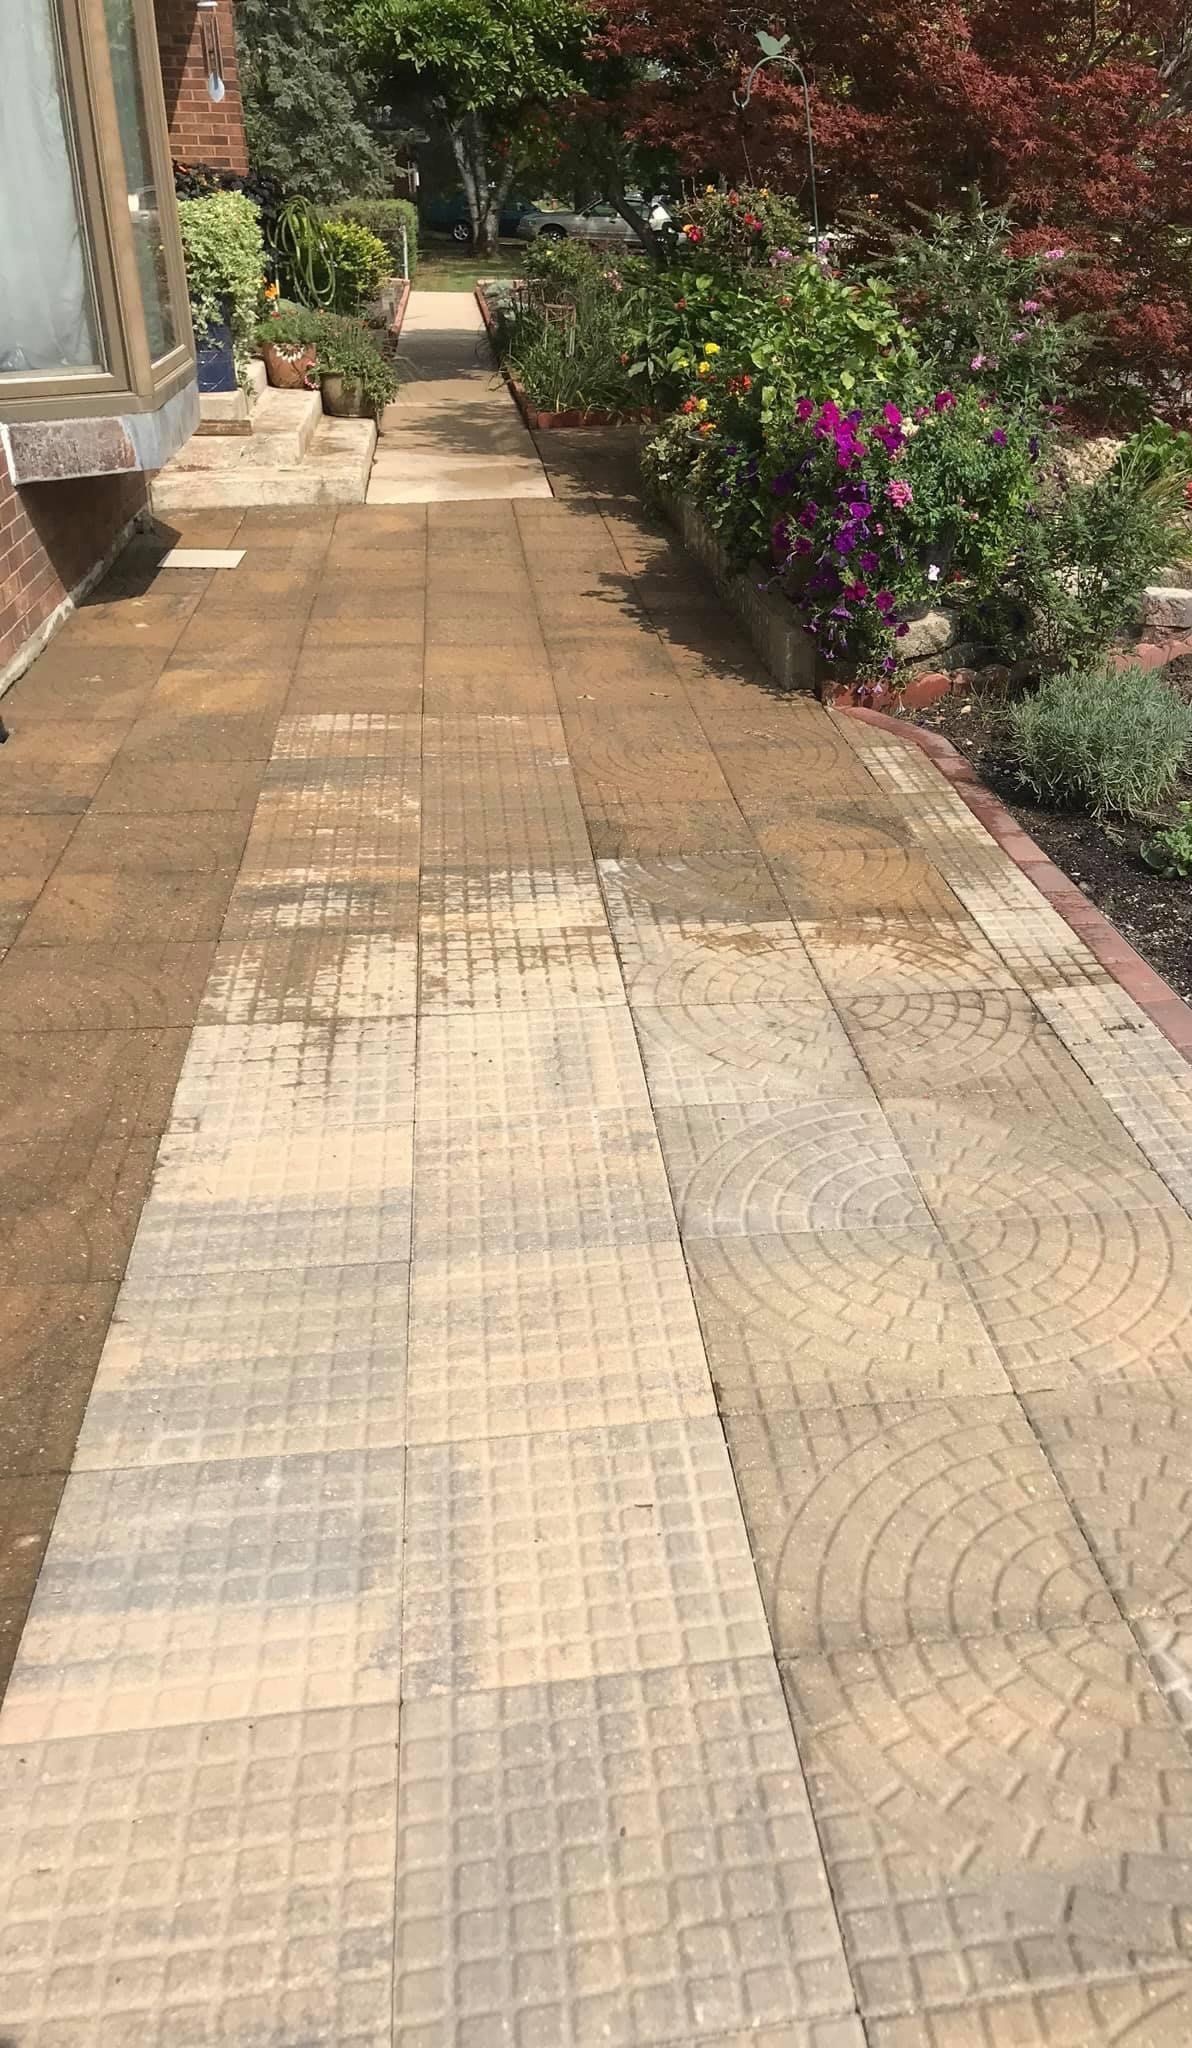 Clean pathway